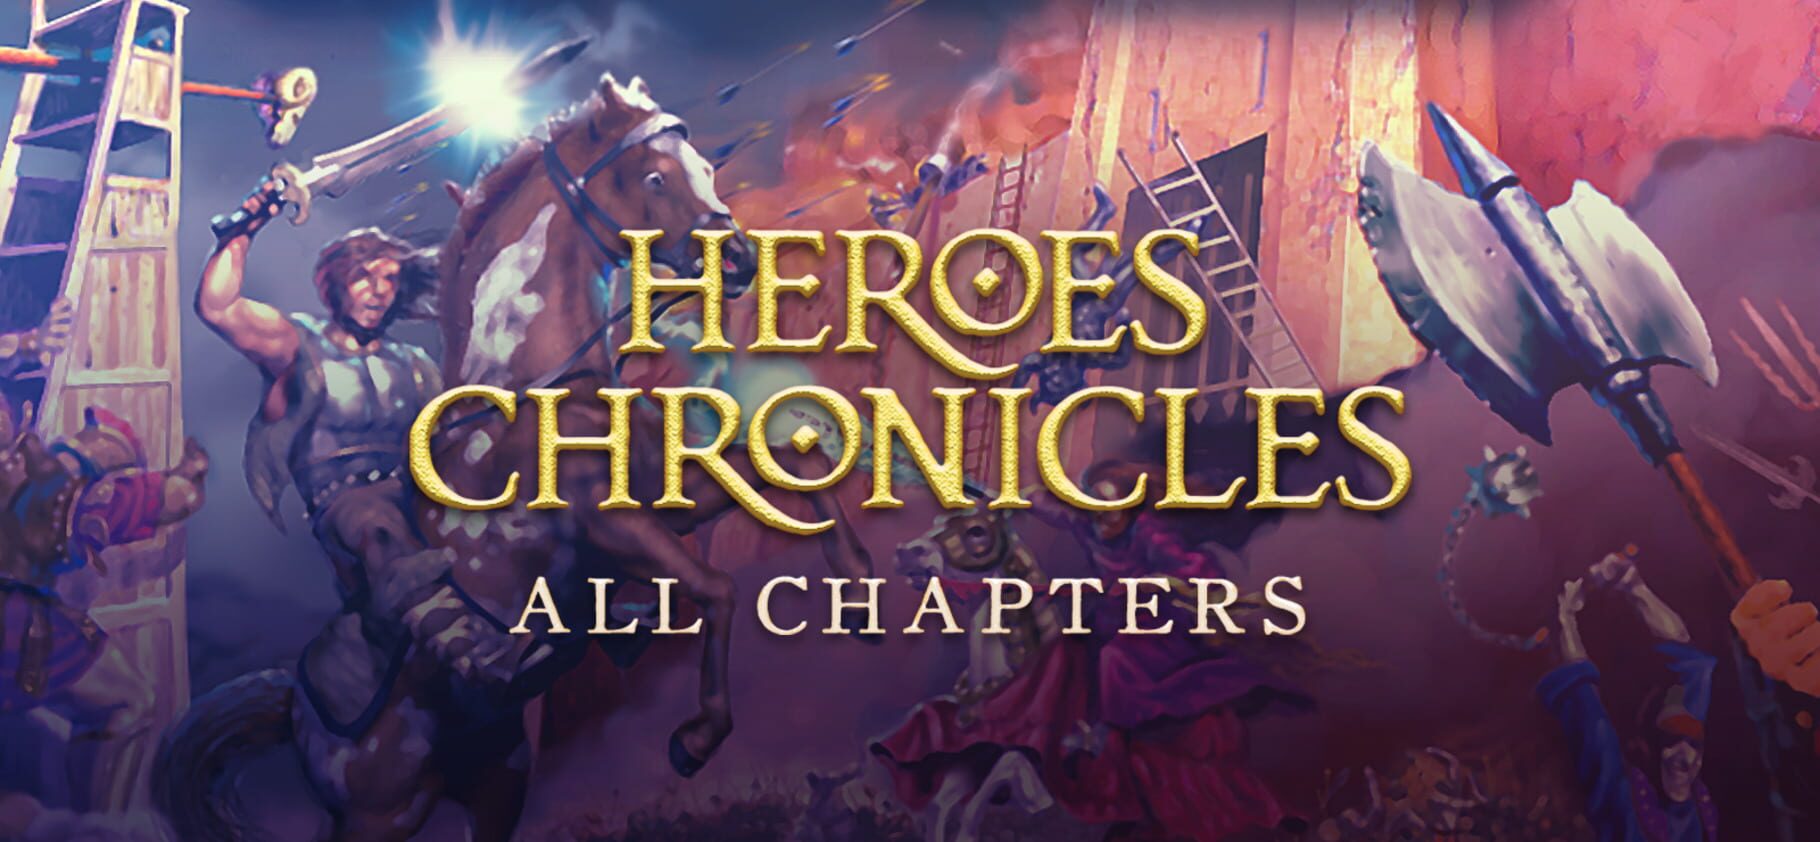 Arte - Heroes Chronicles: All Chapters